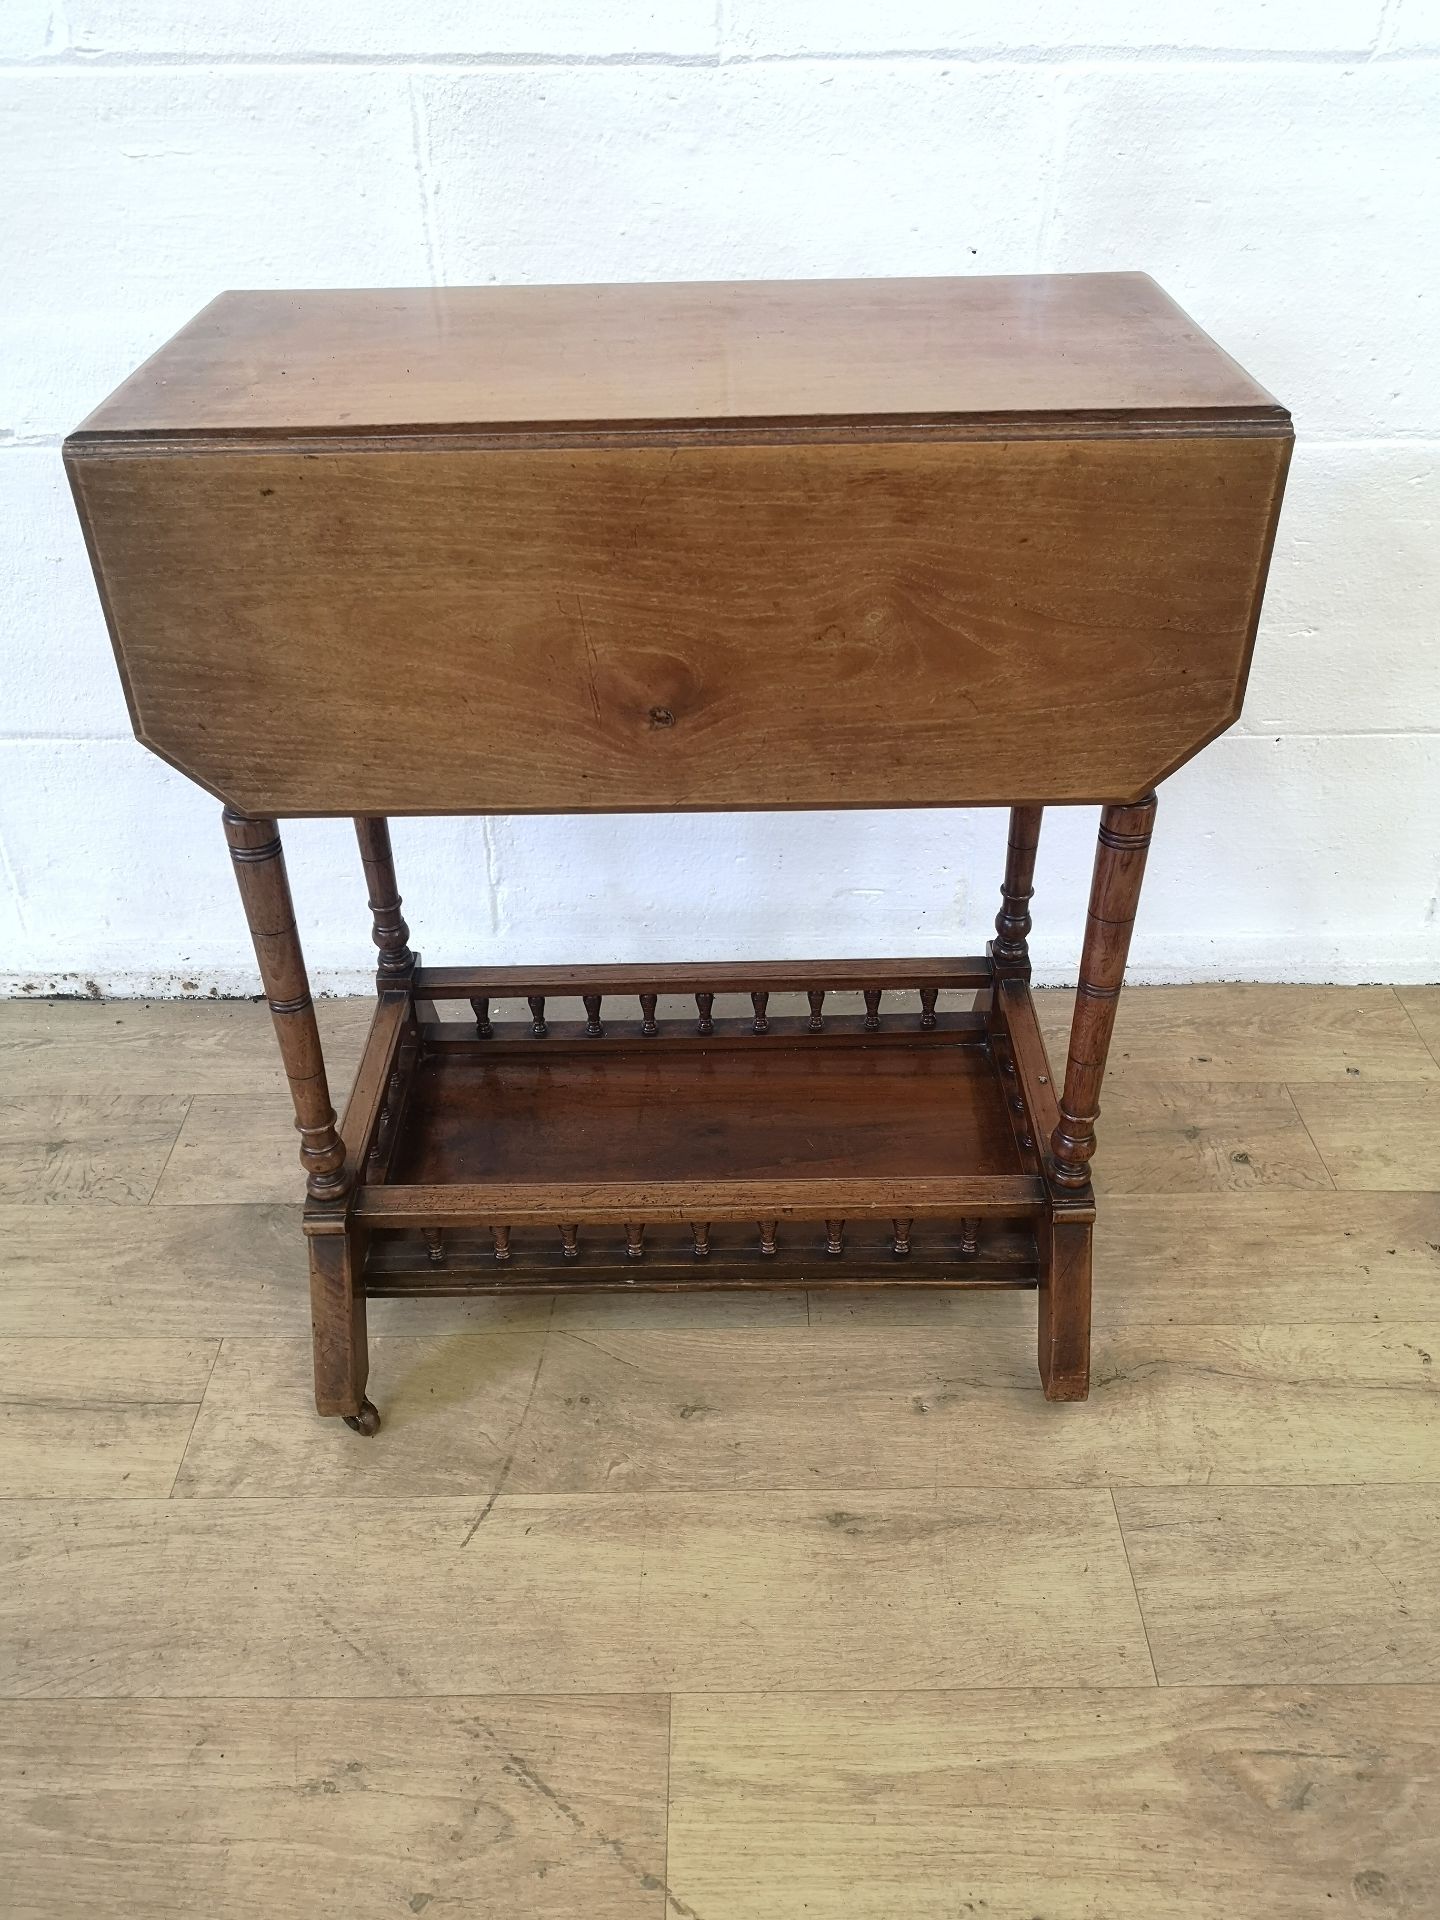 Mahogany drop leaf side table with canted corners